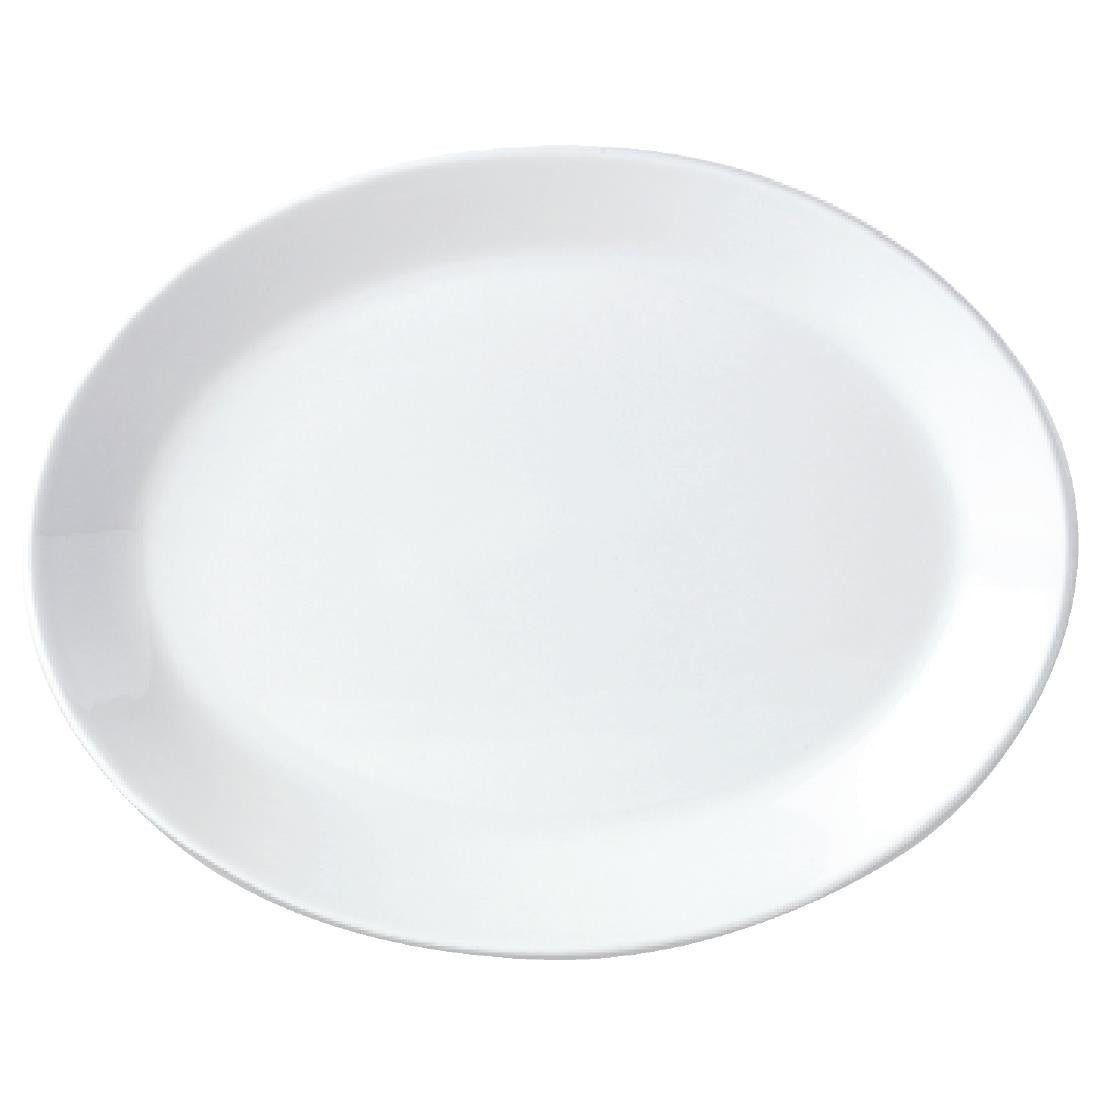 Steelite Simplicity White Oval Coupe Dishes 395mm (Pack of 6)